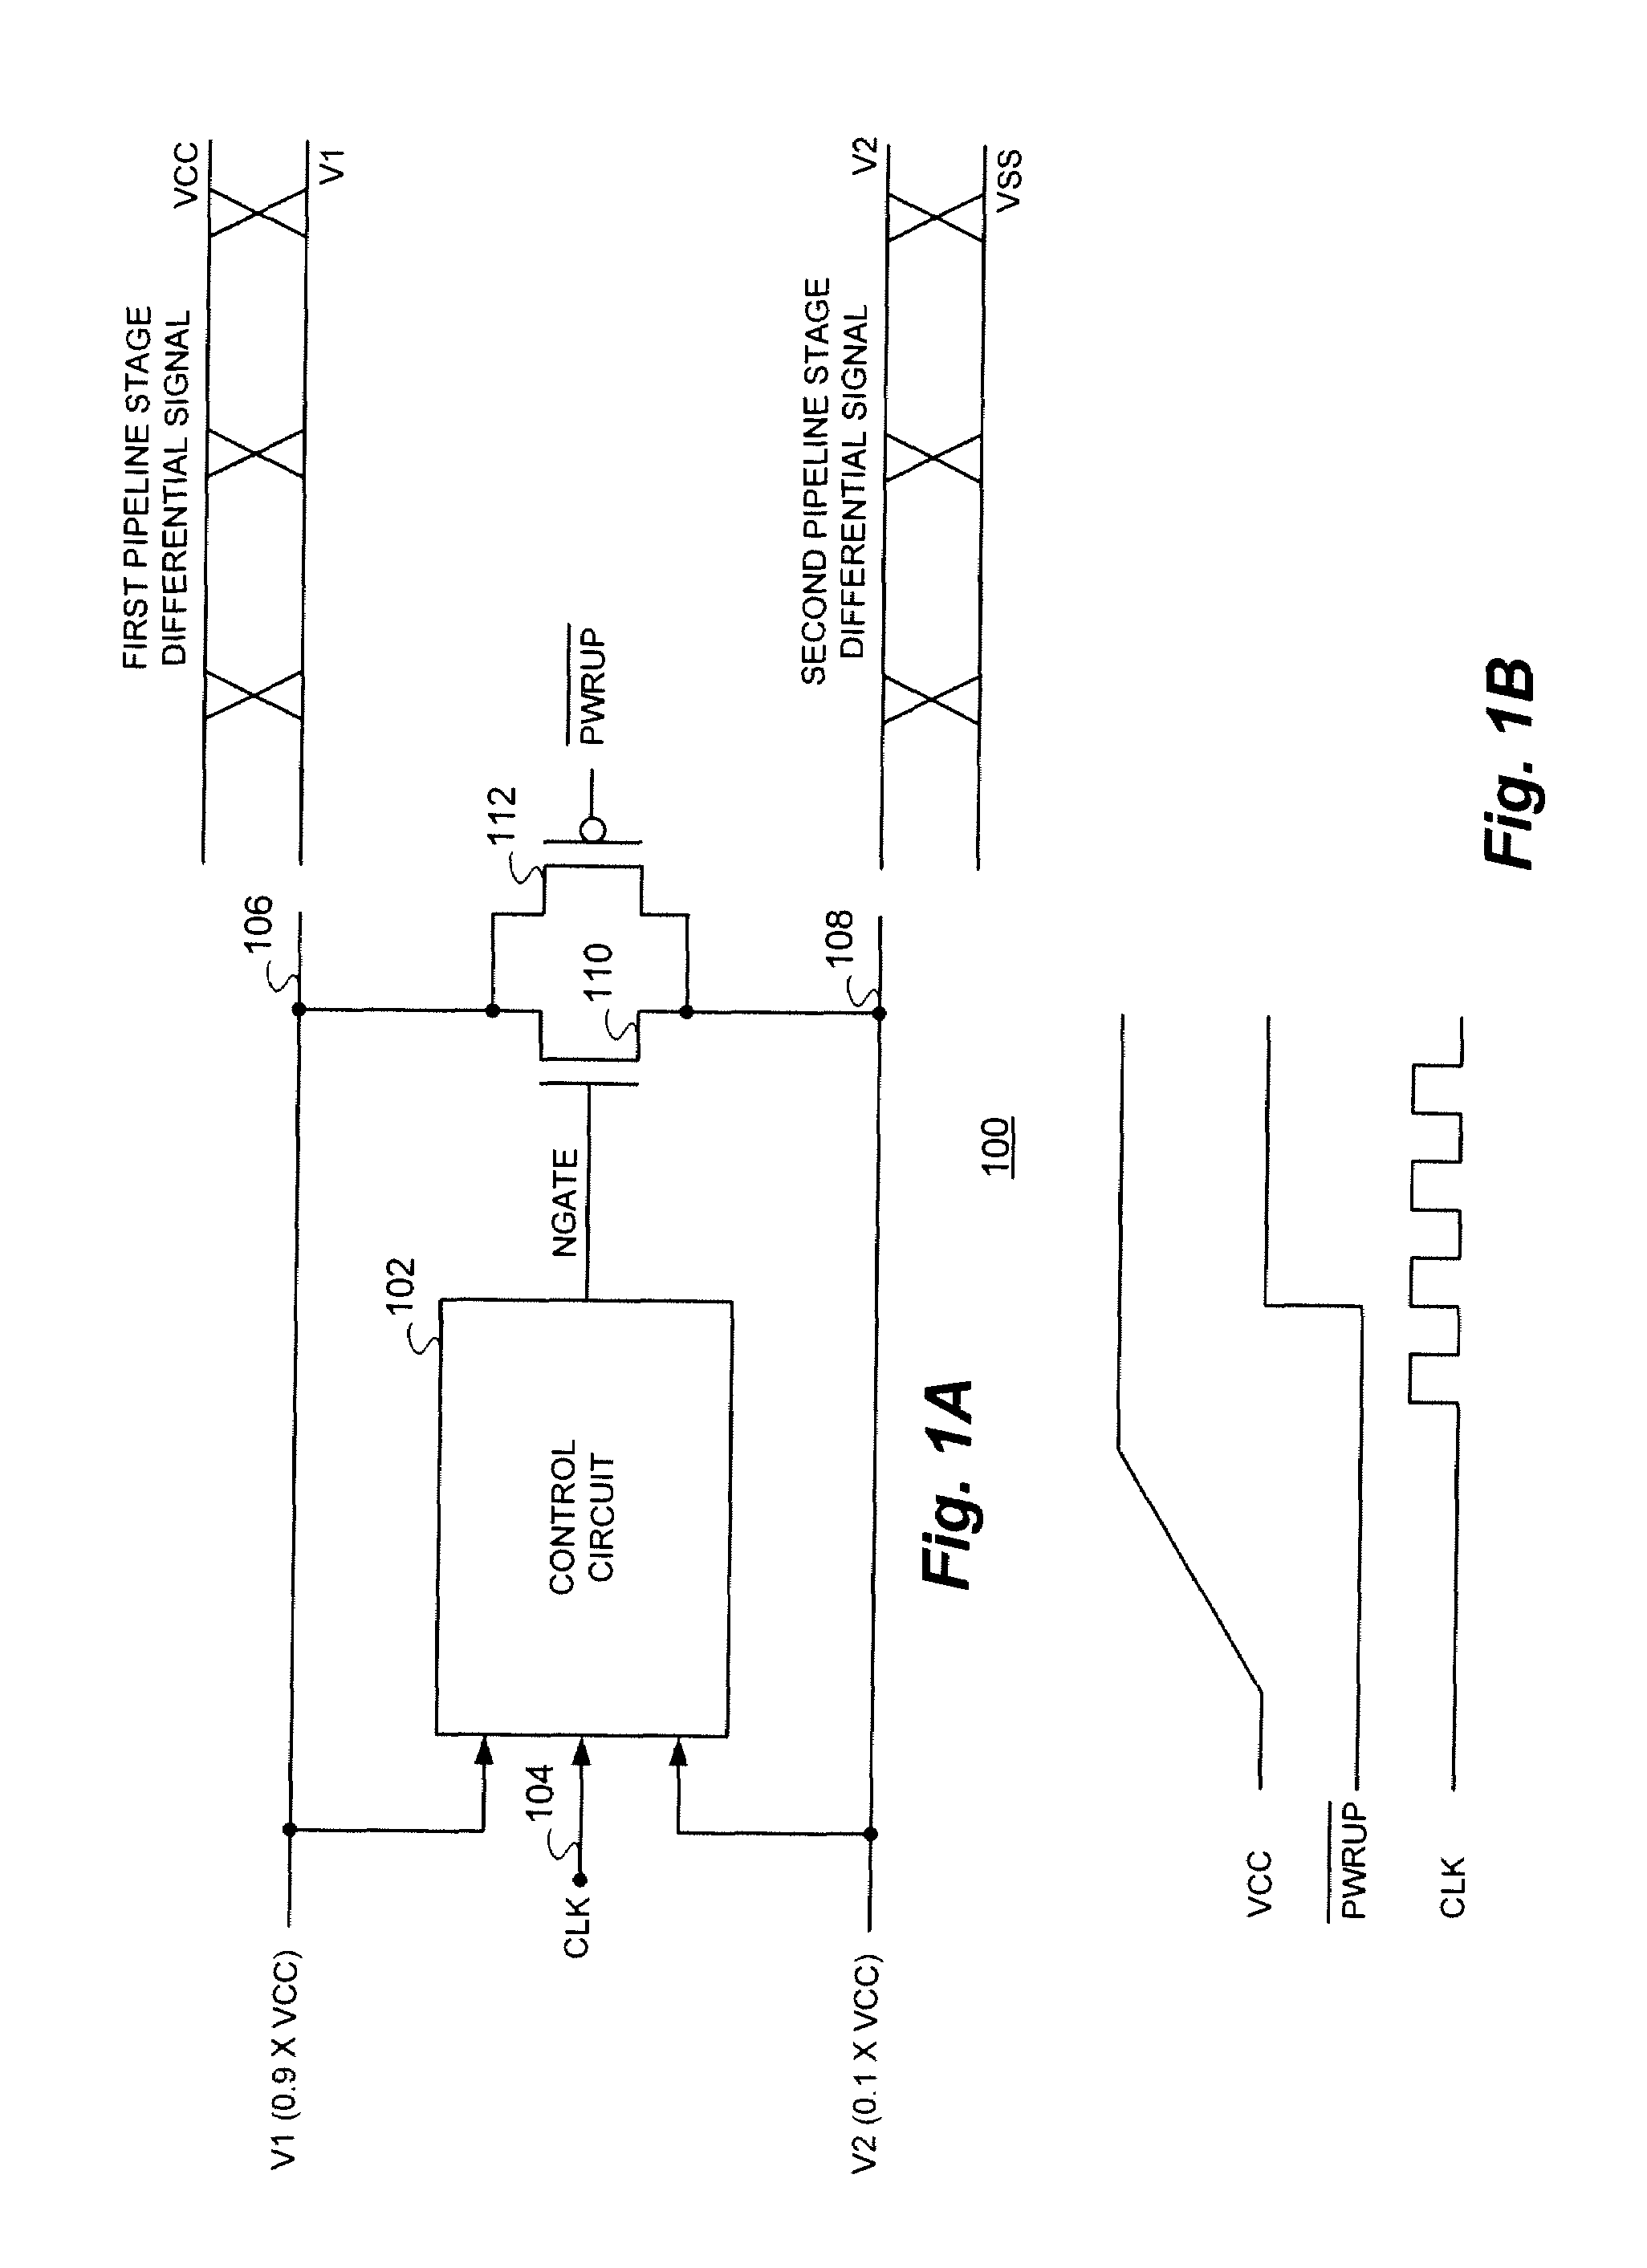 Short-circuit charge-sharing technique for integrated circuit devices